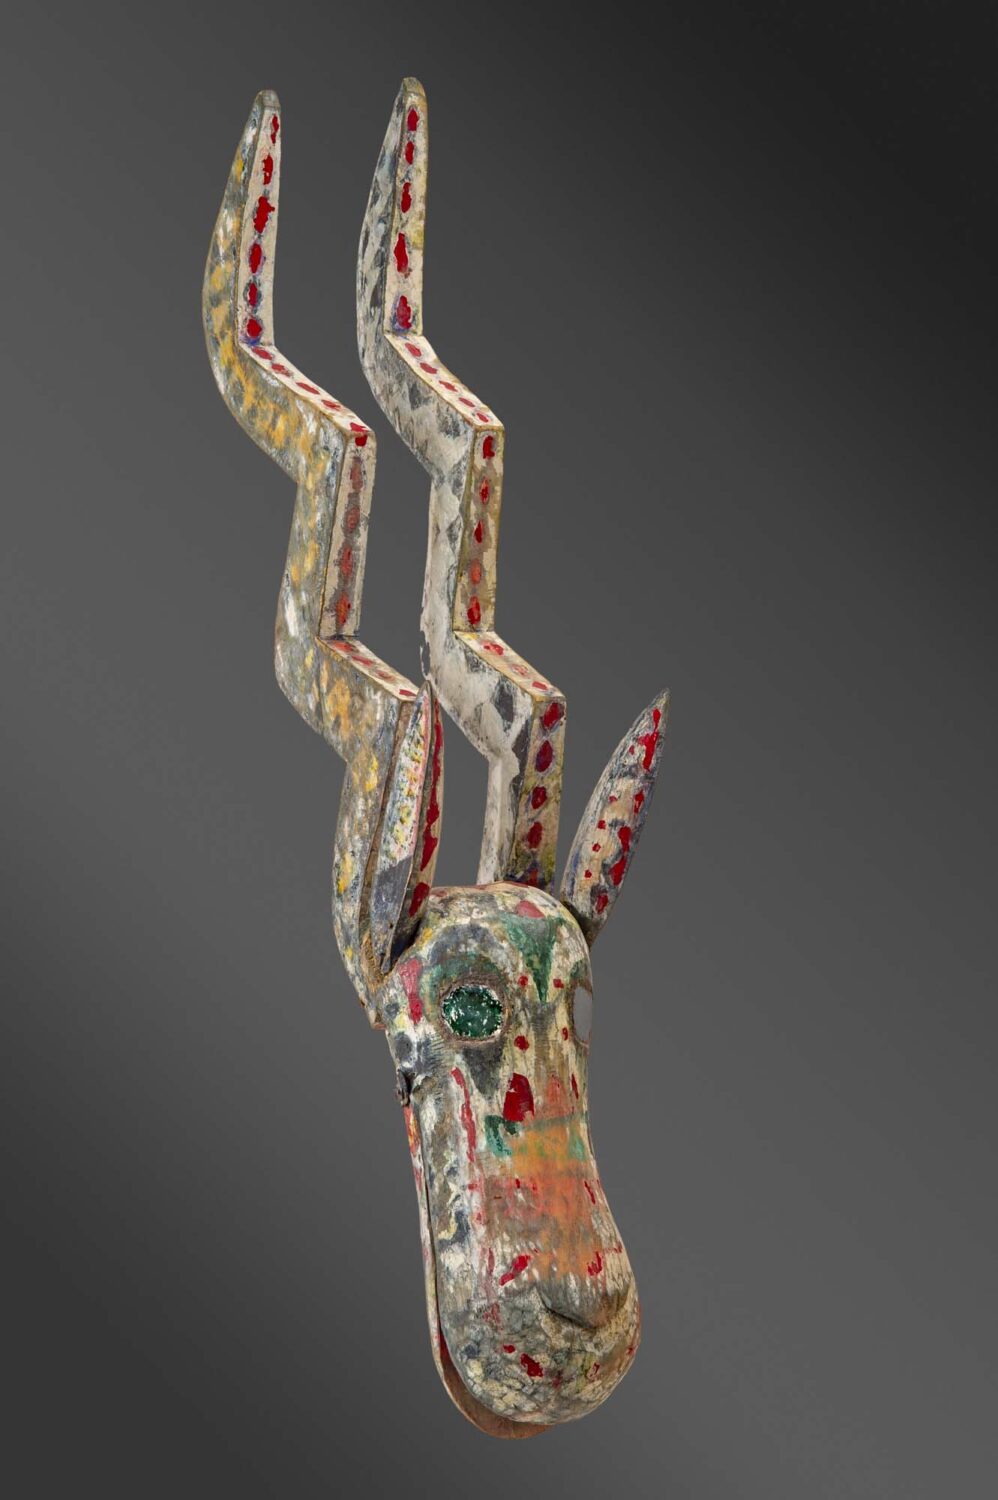 thumbnail of Bozo antelope marionette crest (Sogo koun) made of wood and polychrome from the Cercle of Segou